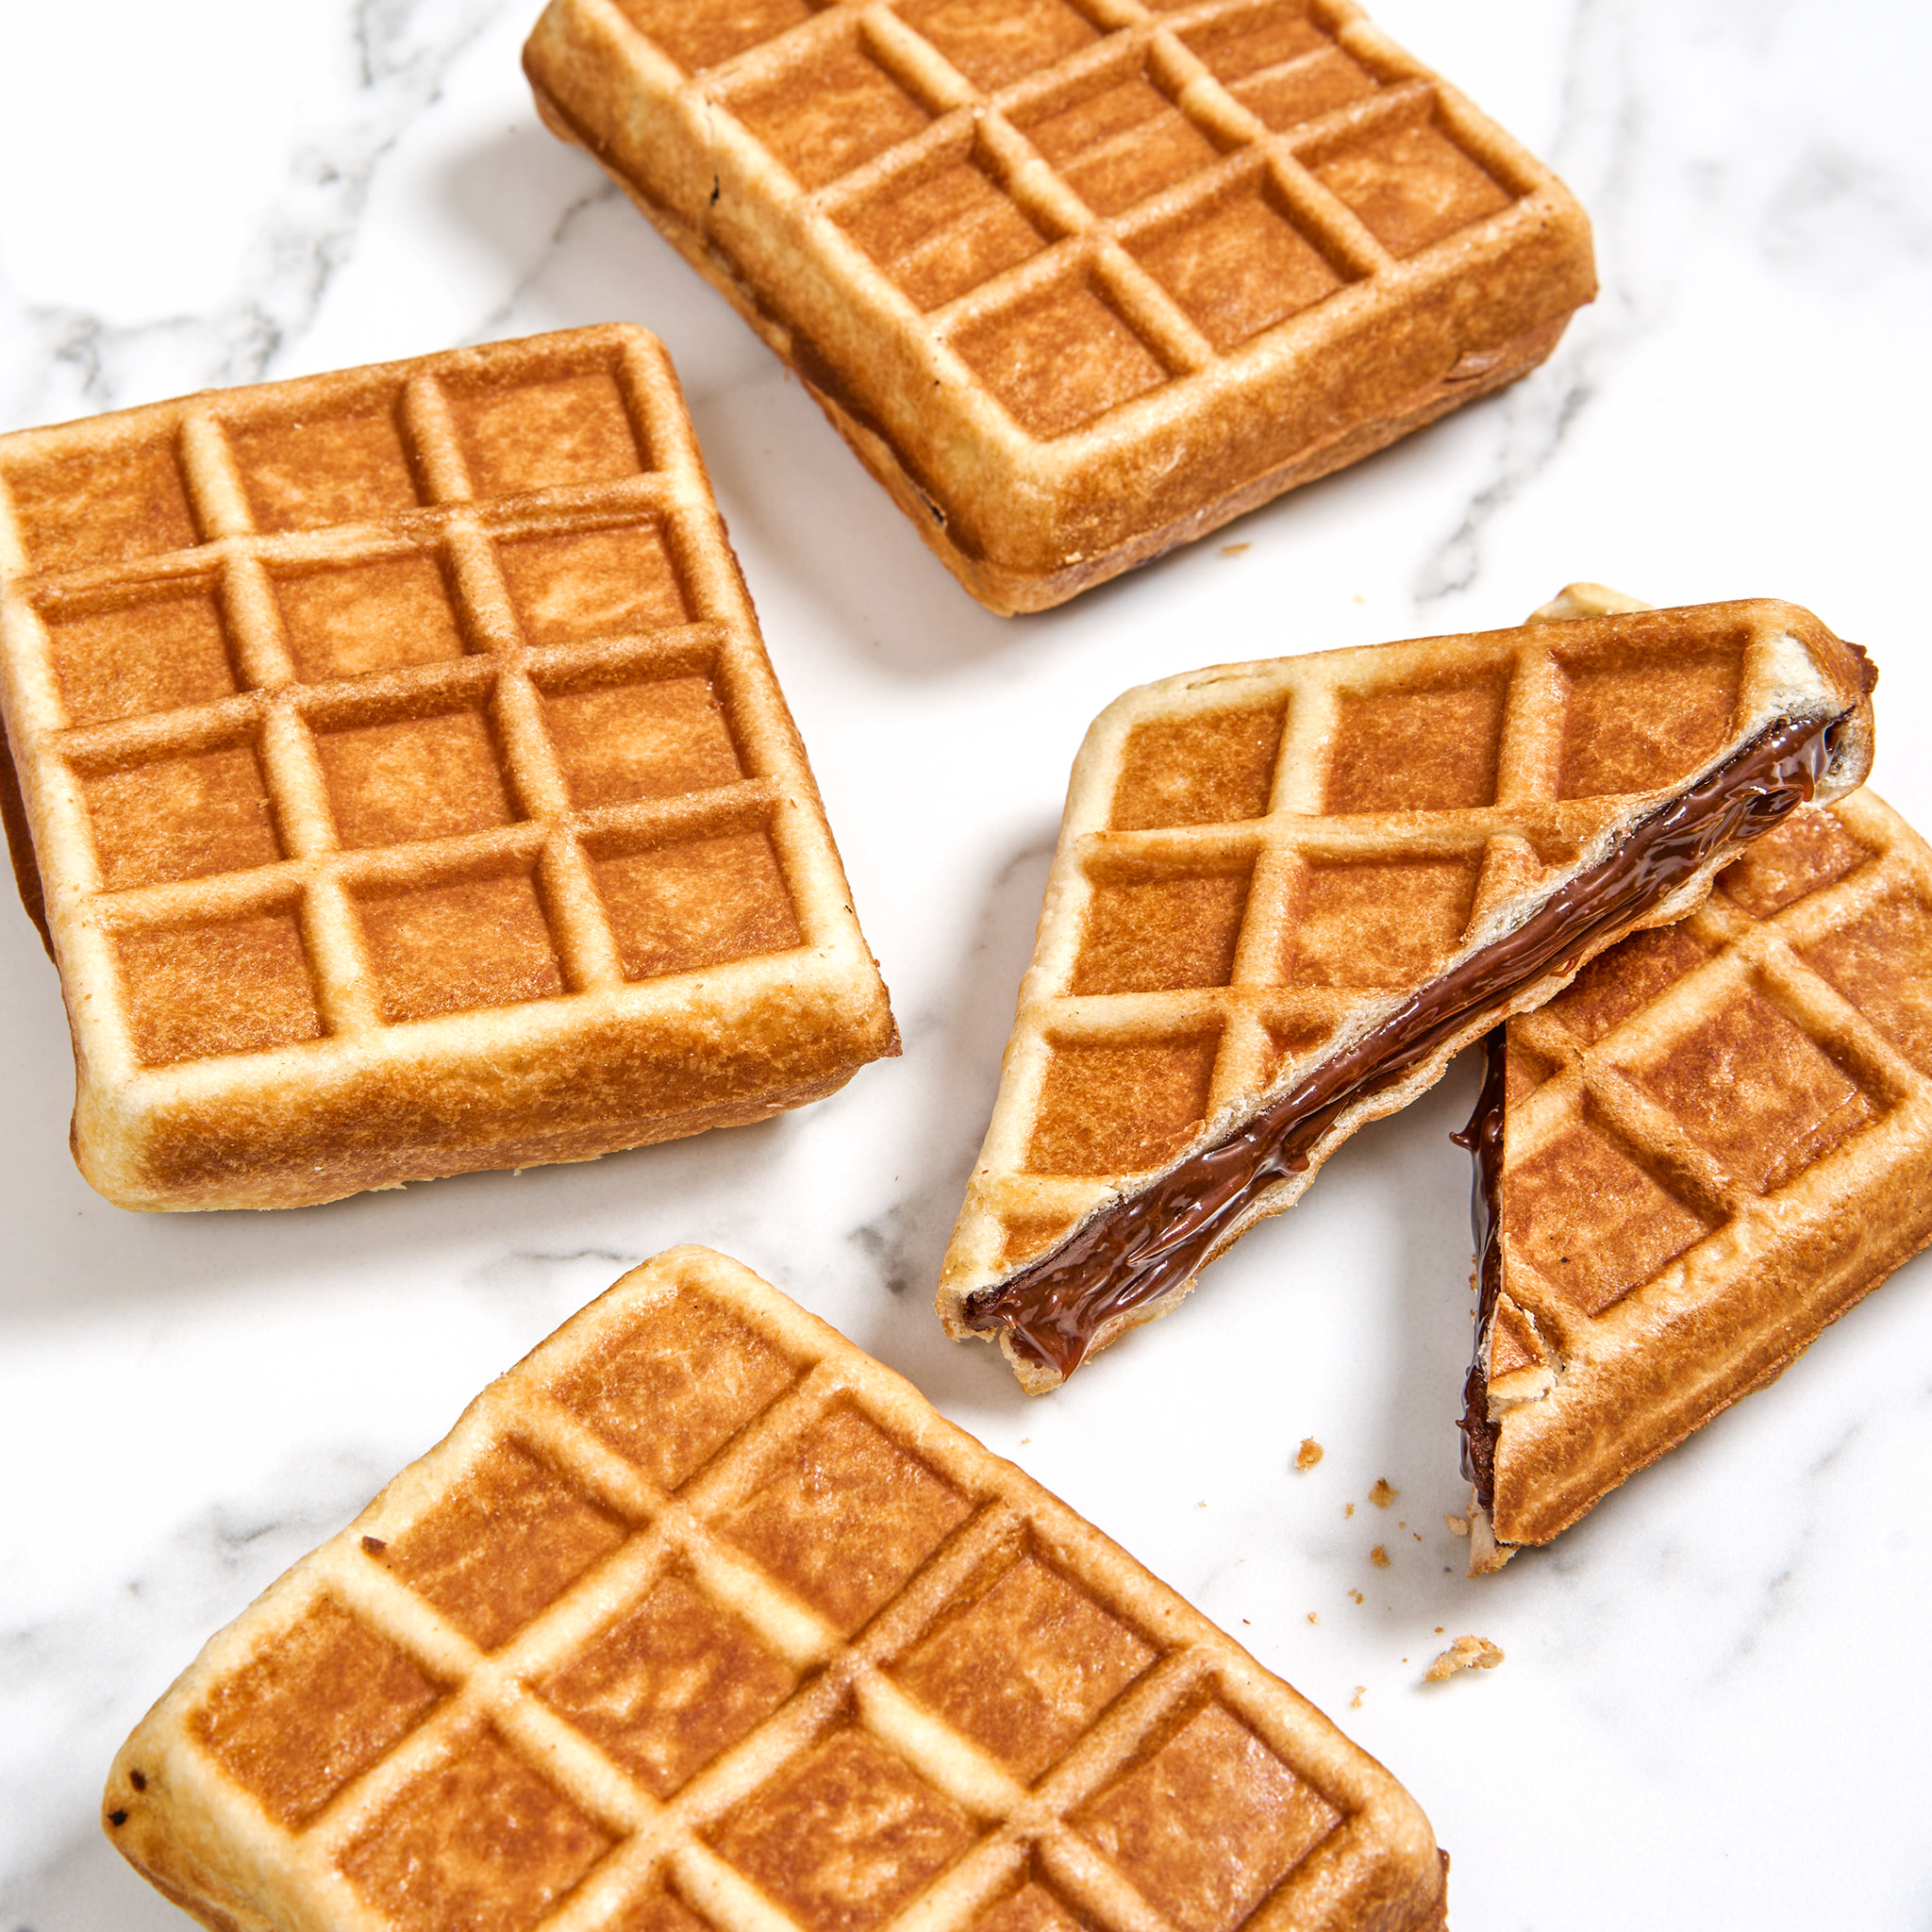 7271 WF Plated Chocolate Filled Belgian Waffles Desserts